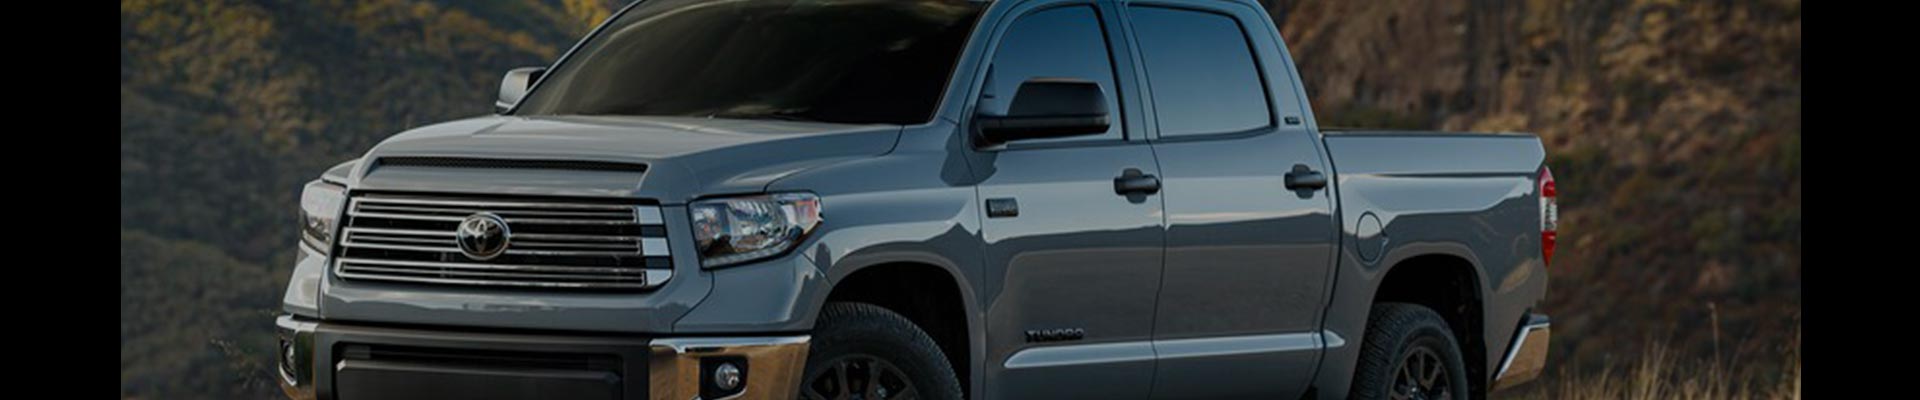 Shop Replacement and OEM 2008 Toyota Tundra Parts with Discounted Price on the Net